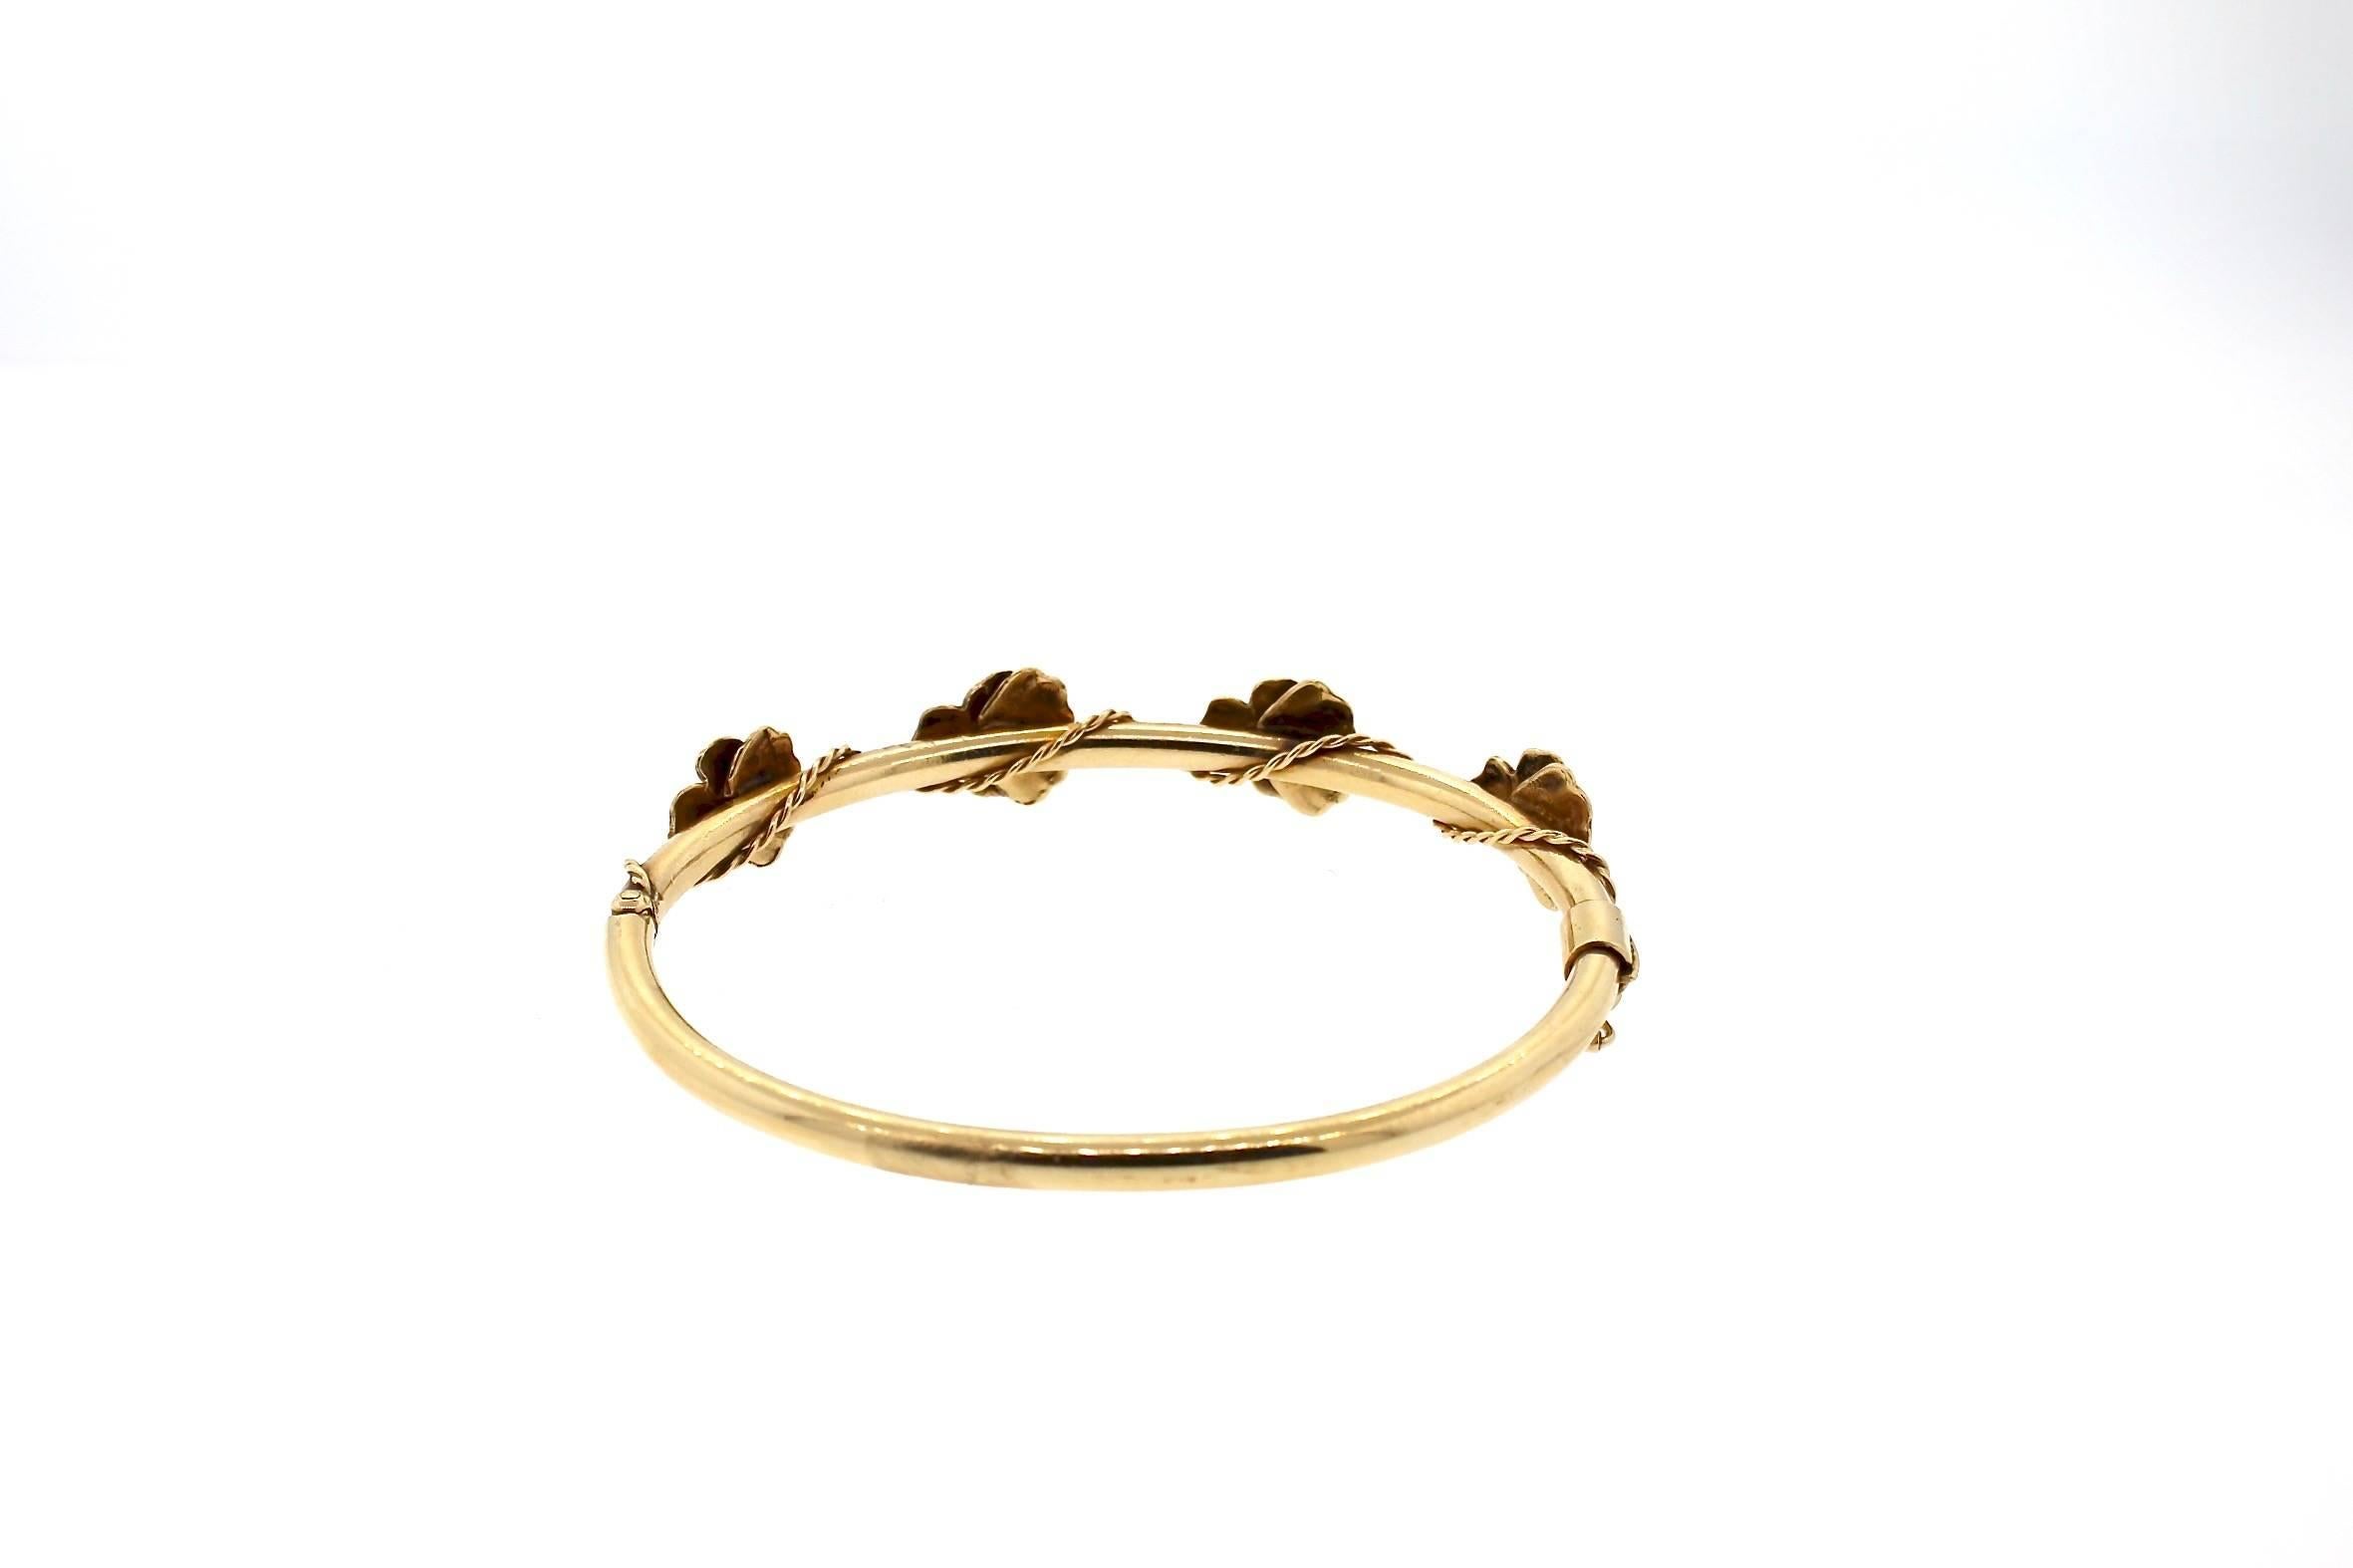 Four gold purple enamel pansy flowers set with diamonds in the center are set on top of this 14k yellow gold hollow bangle for a feminine look.  A thin twisted wire of gold accents the design.  This bracelet is perfect on its own, or stacked with